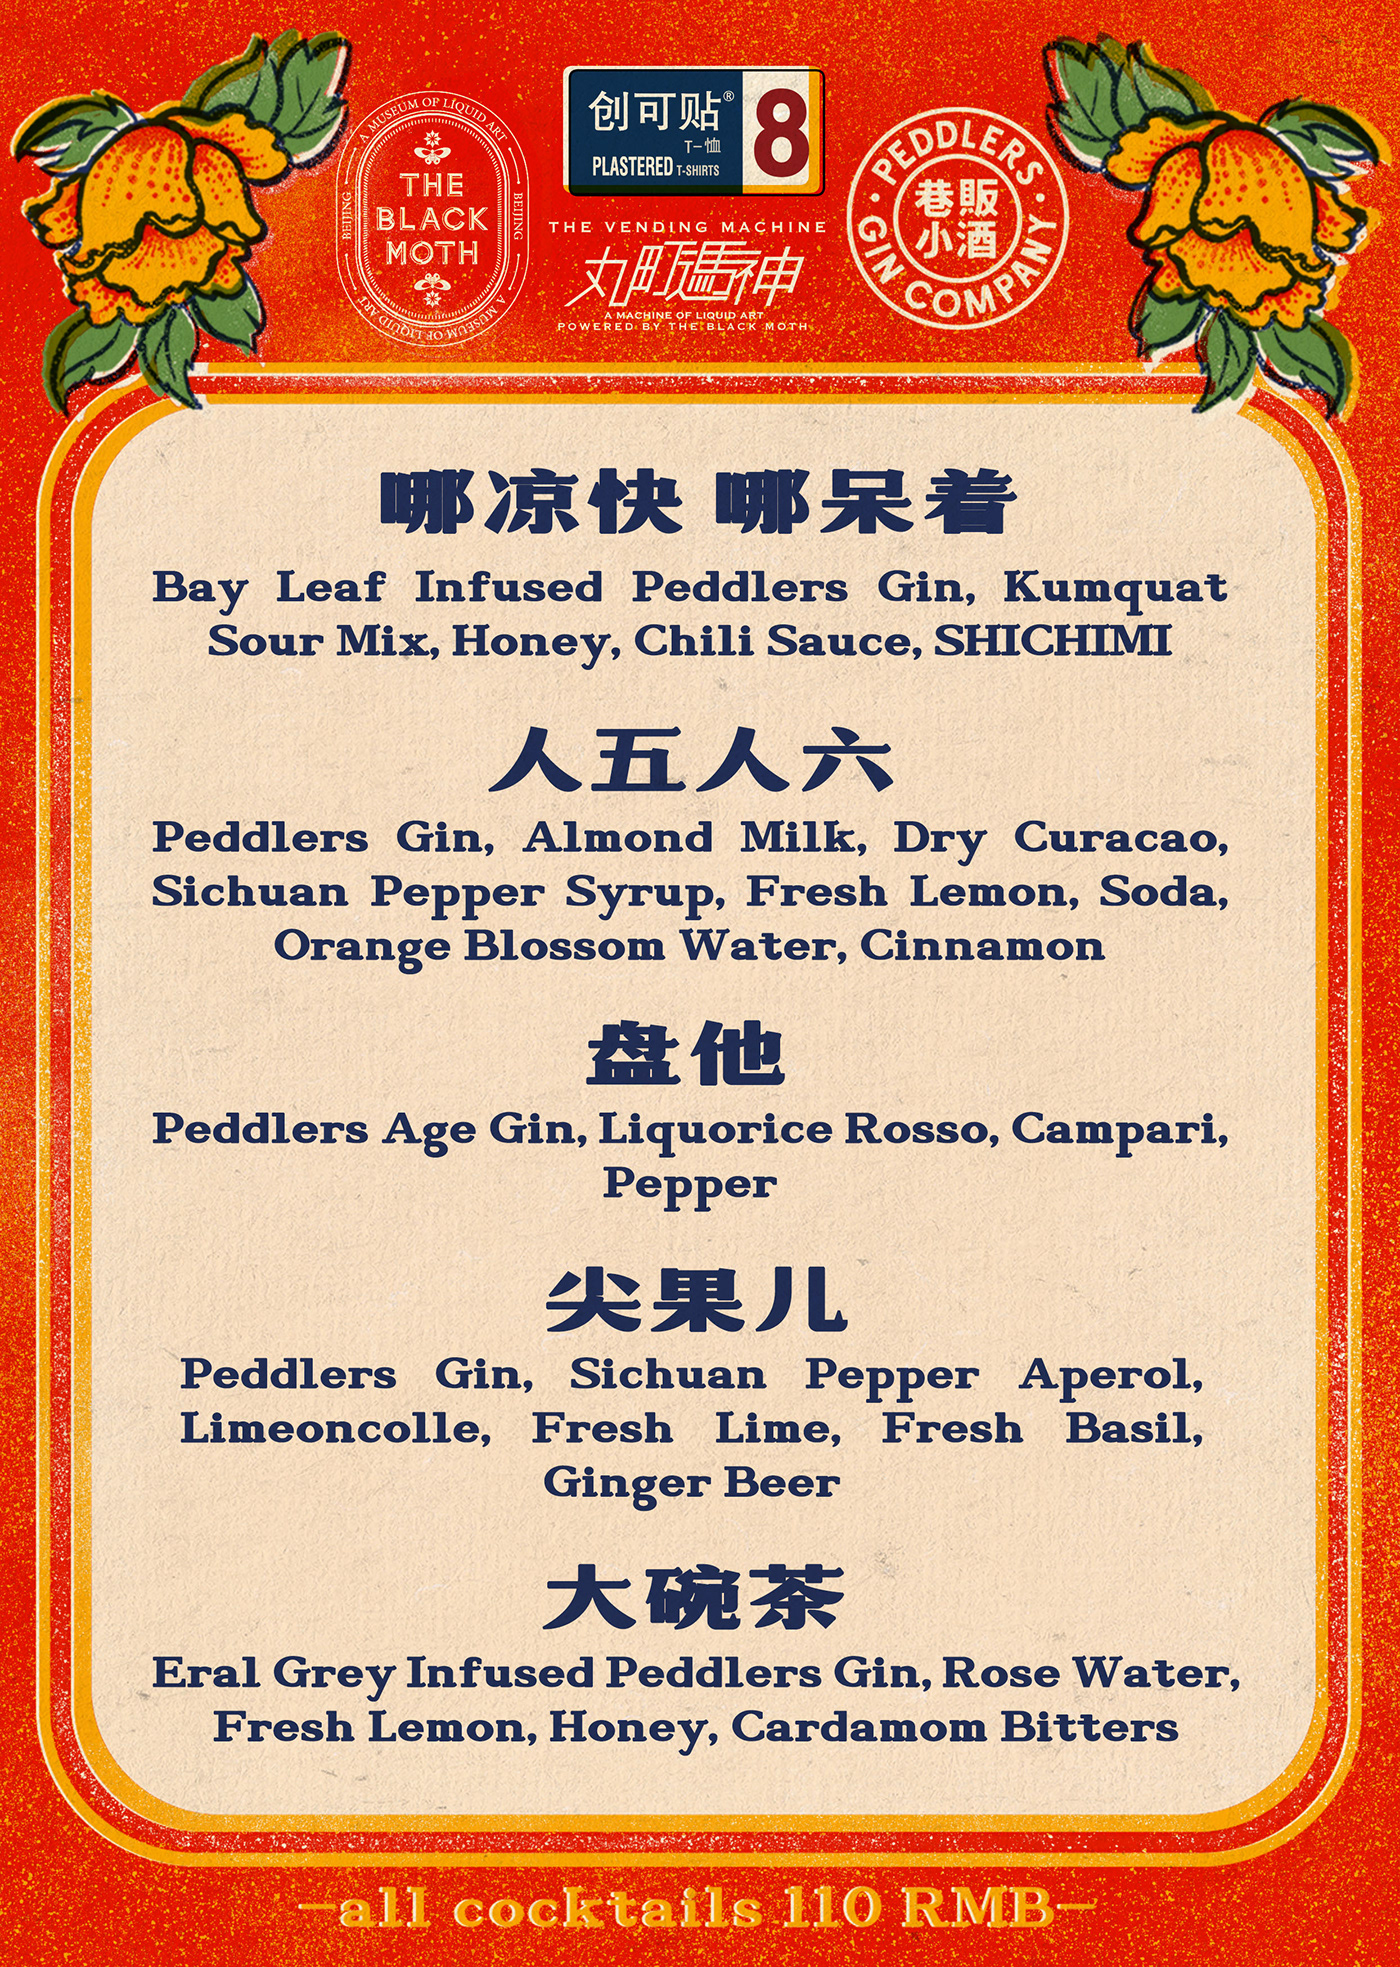 beijing china double happiness gin label gin label design plastered8